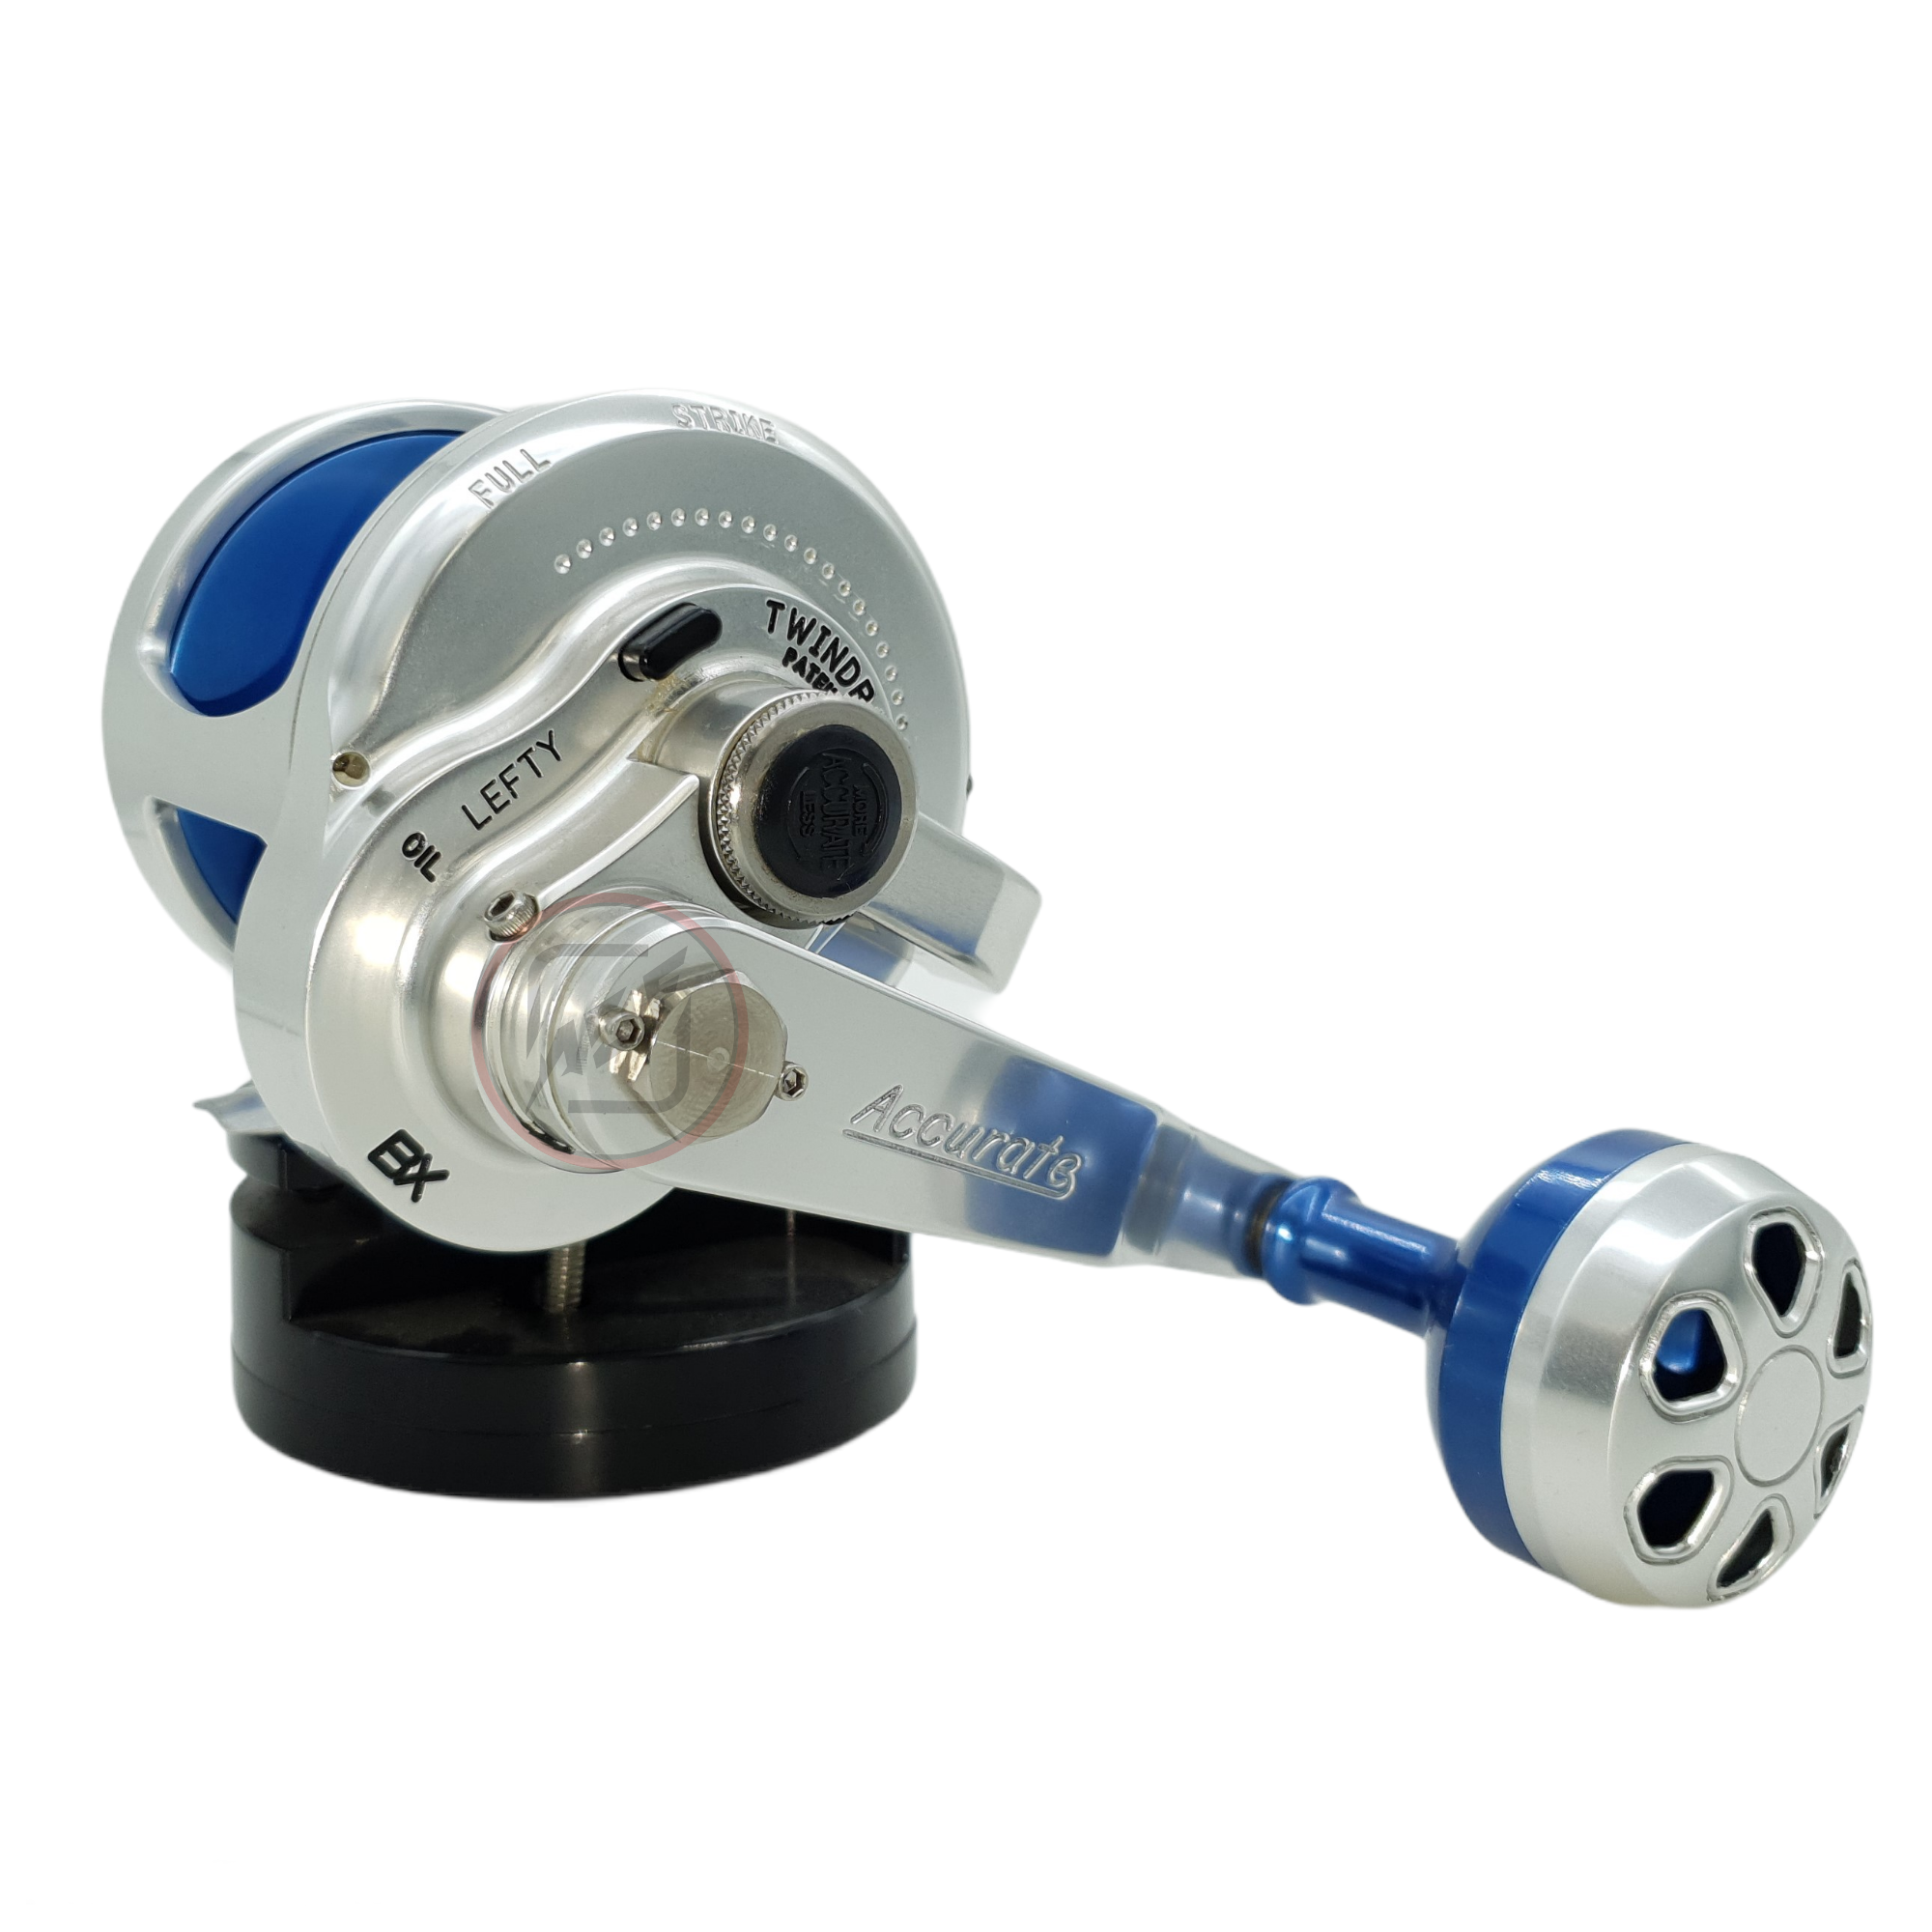 Accurate Reel Boss Single Speed Reel BX-600 – Anglers Outfitter - AOF